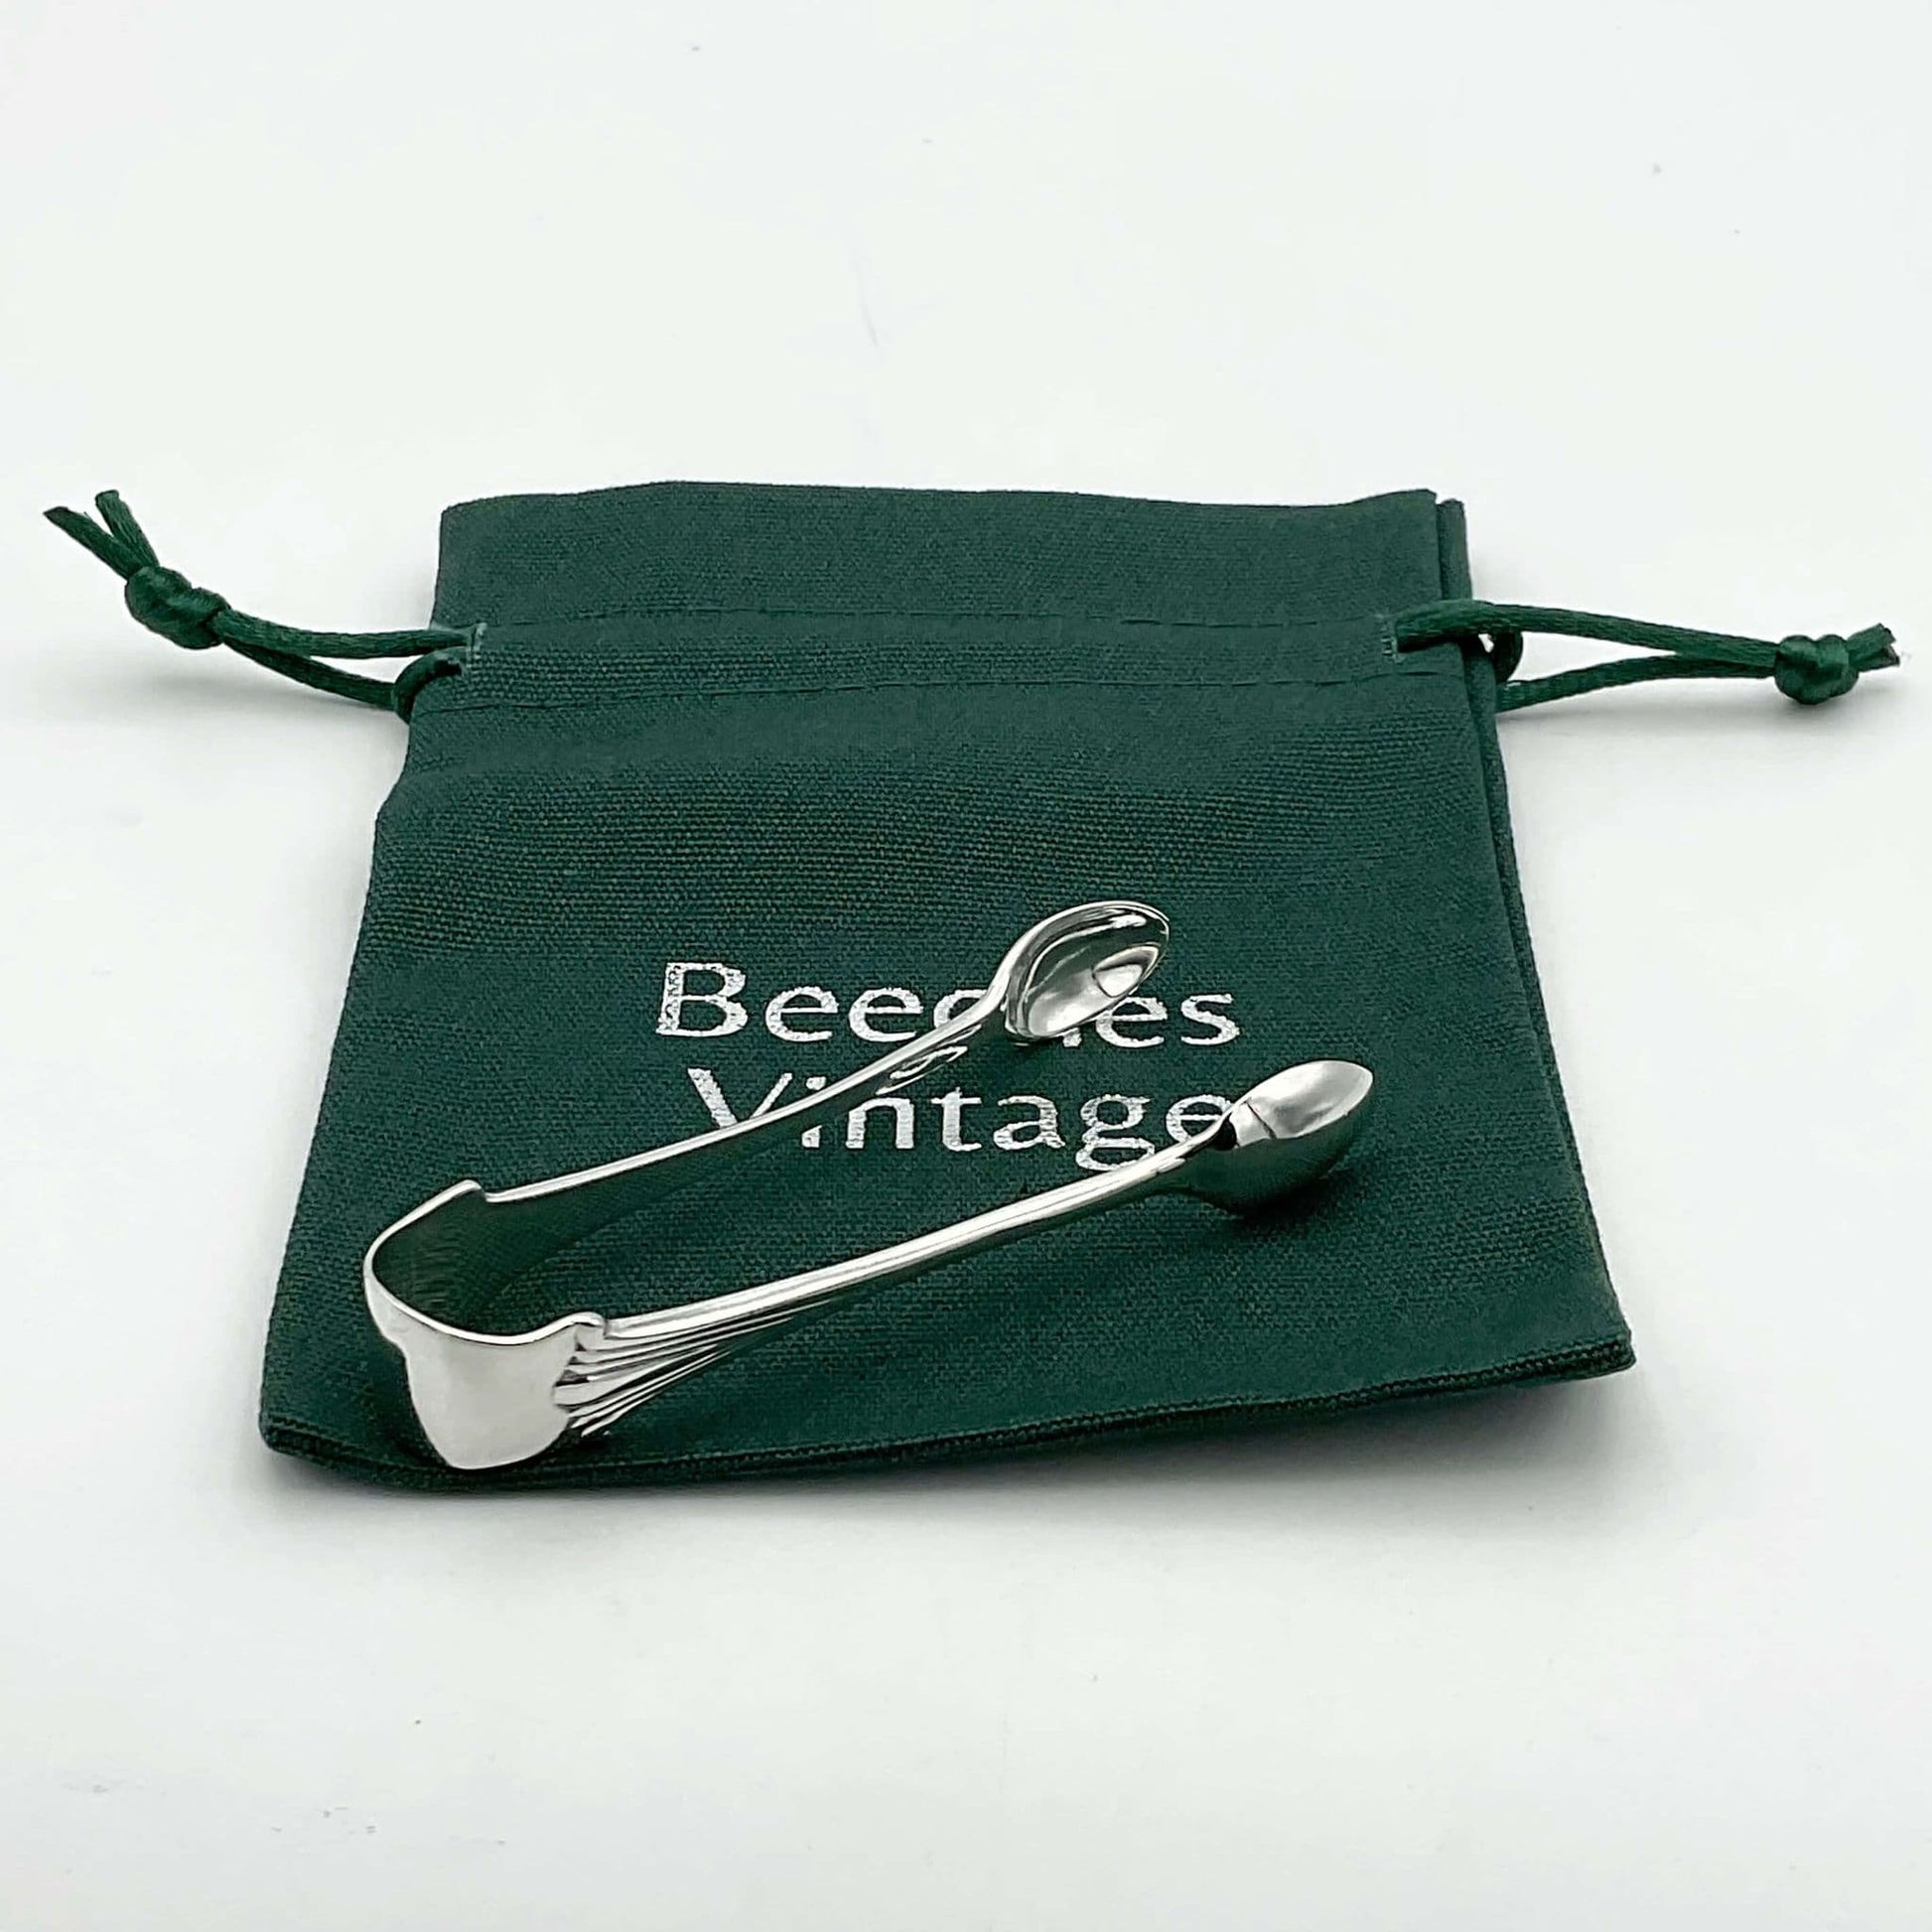 Silver sugar tongs showing an art deco design to the art on a white background sitting on a green Beeches Vintage bag